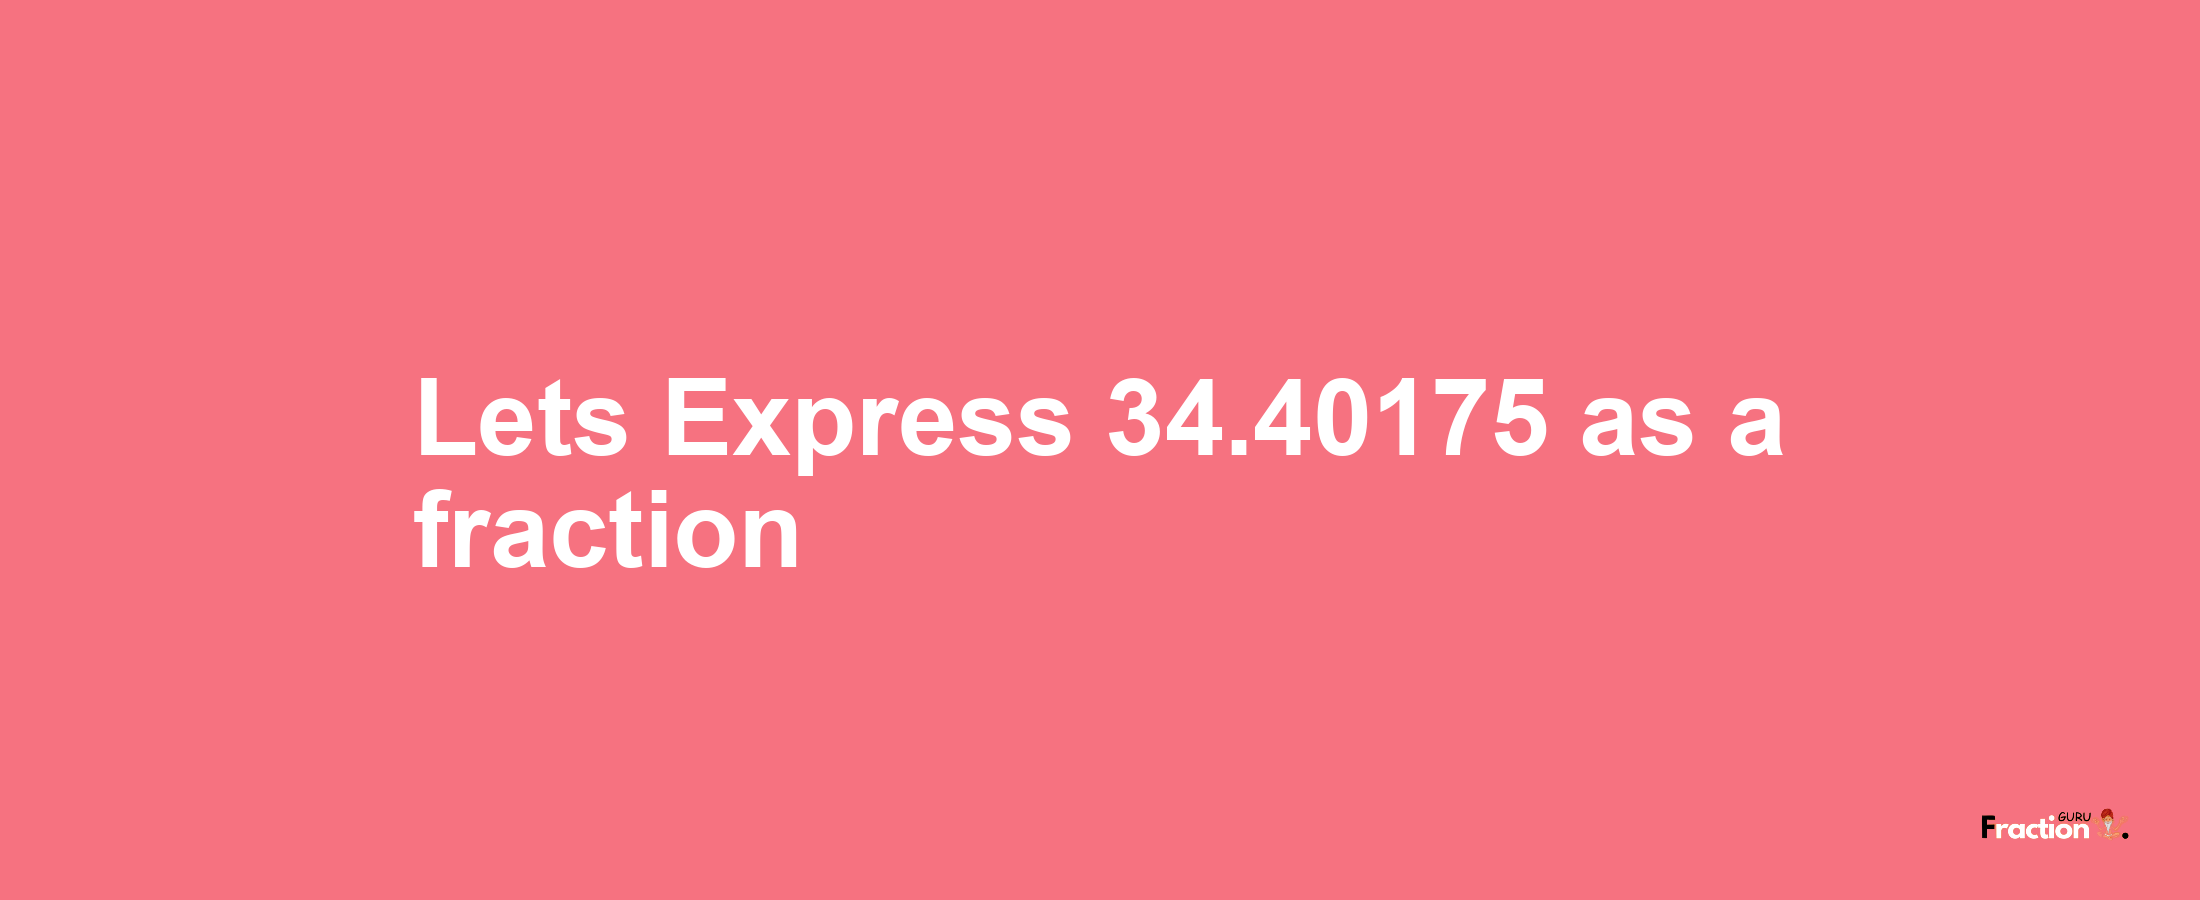 Lets Express 34.40175 as afraction